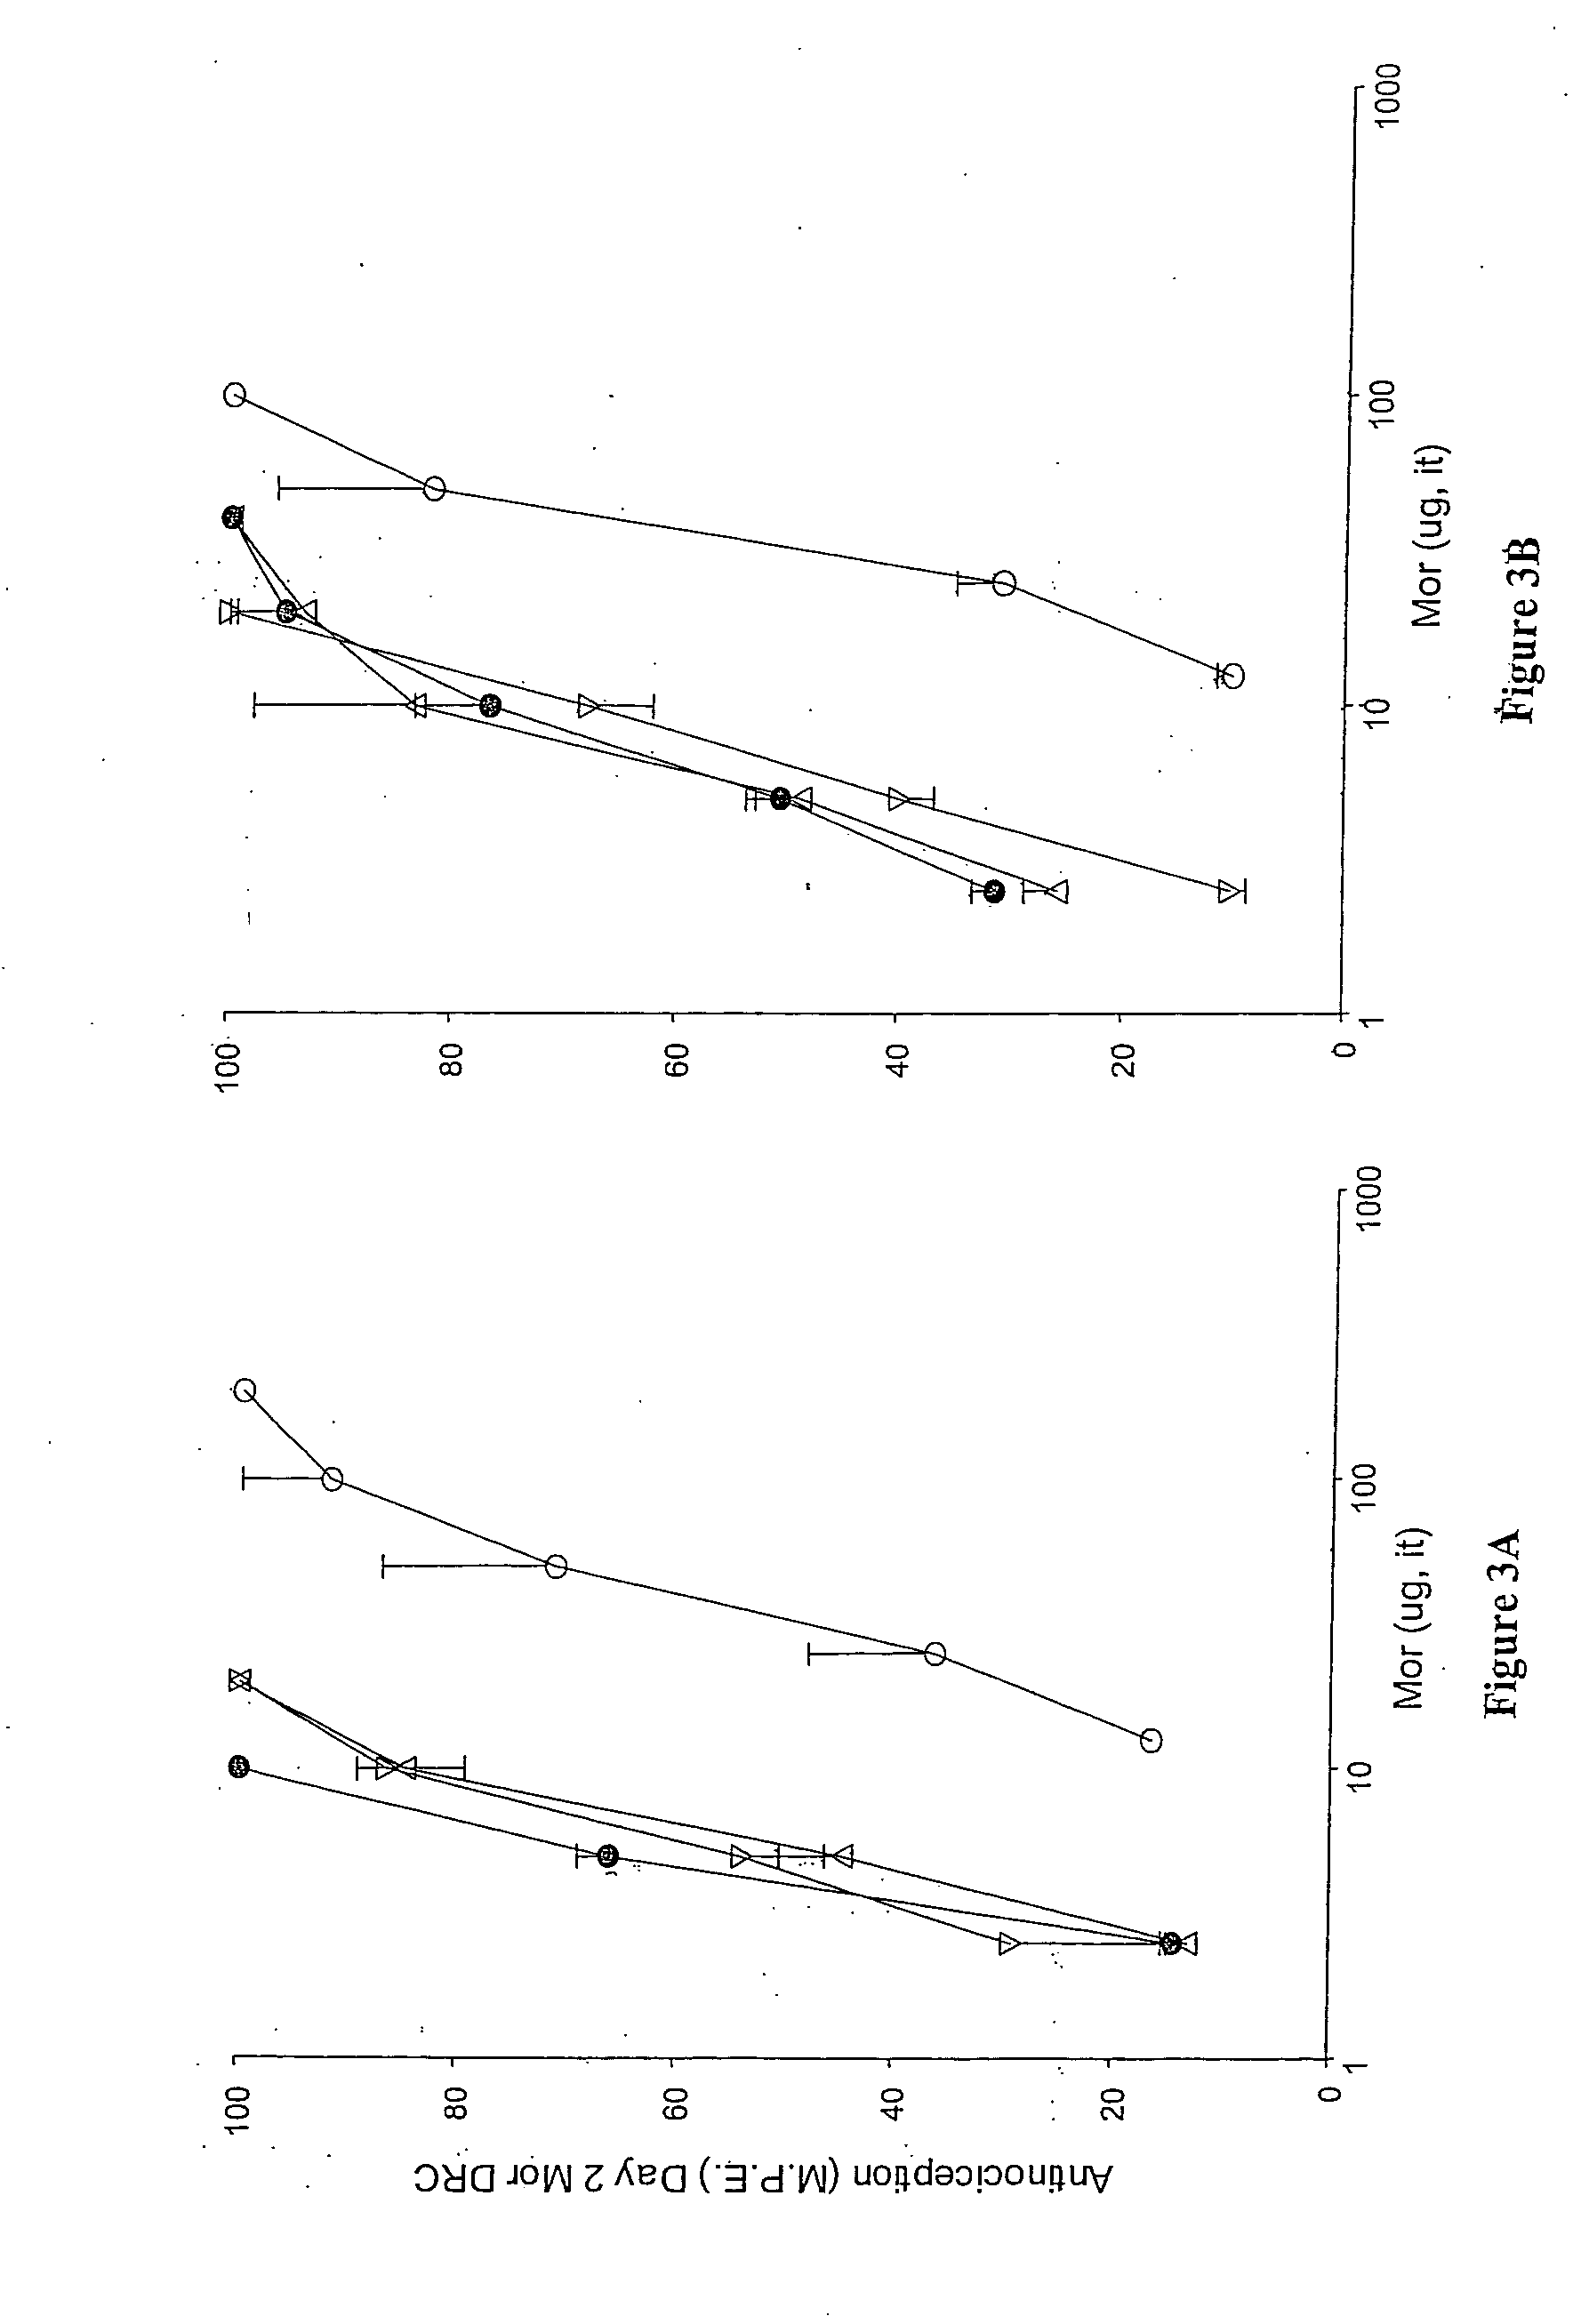 Methods and therapies for potentiating a therapeutic action of an opioid receptor agonist and inhibiting and/or reversing tolerance to opioid receptor agonists